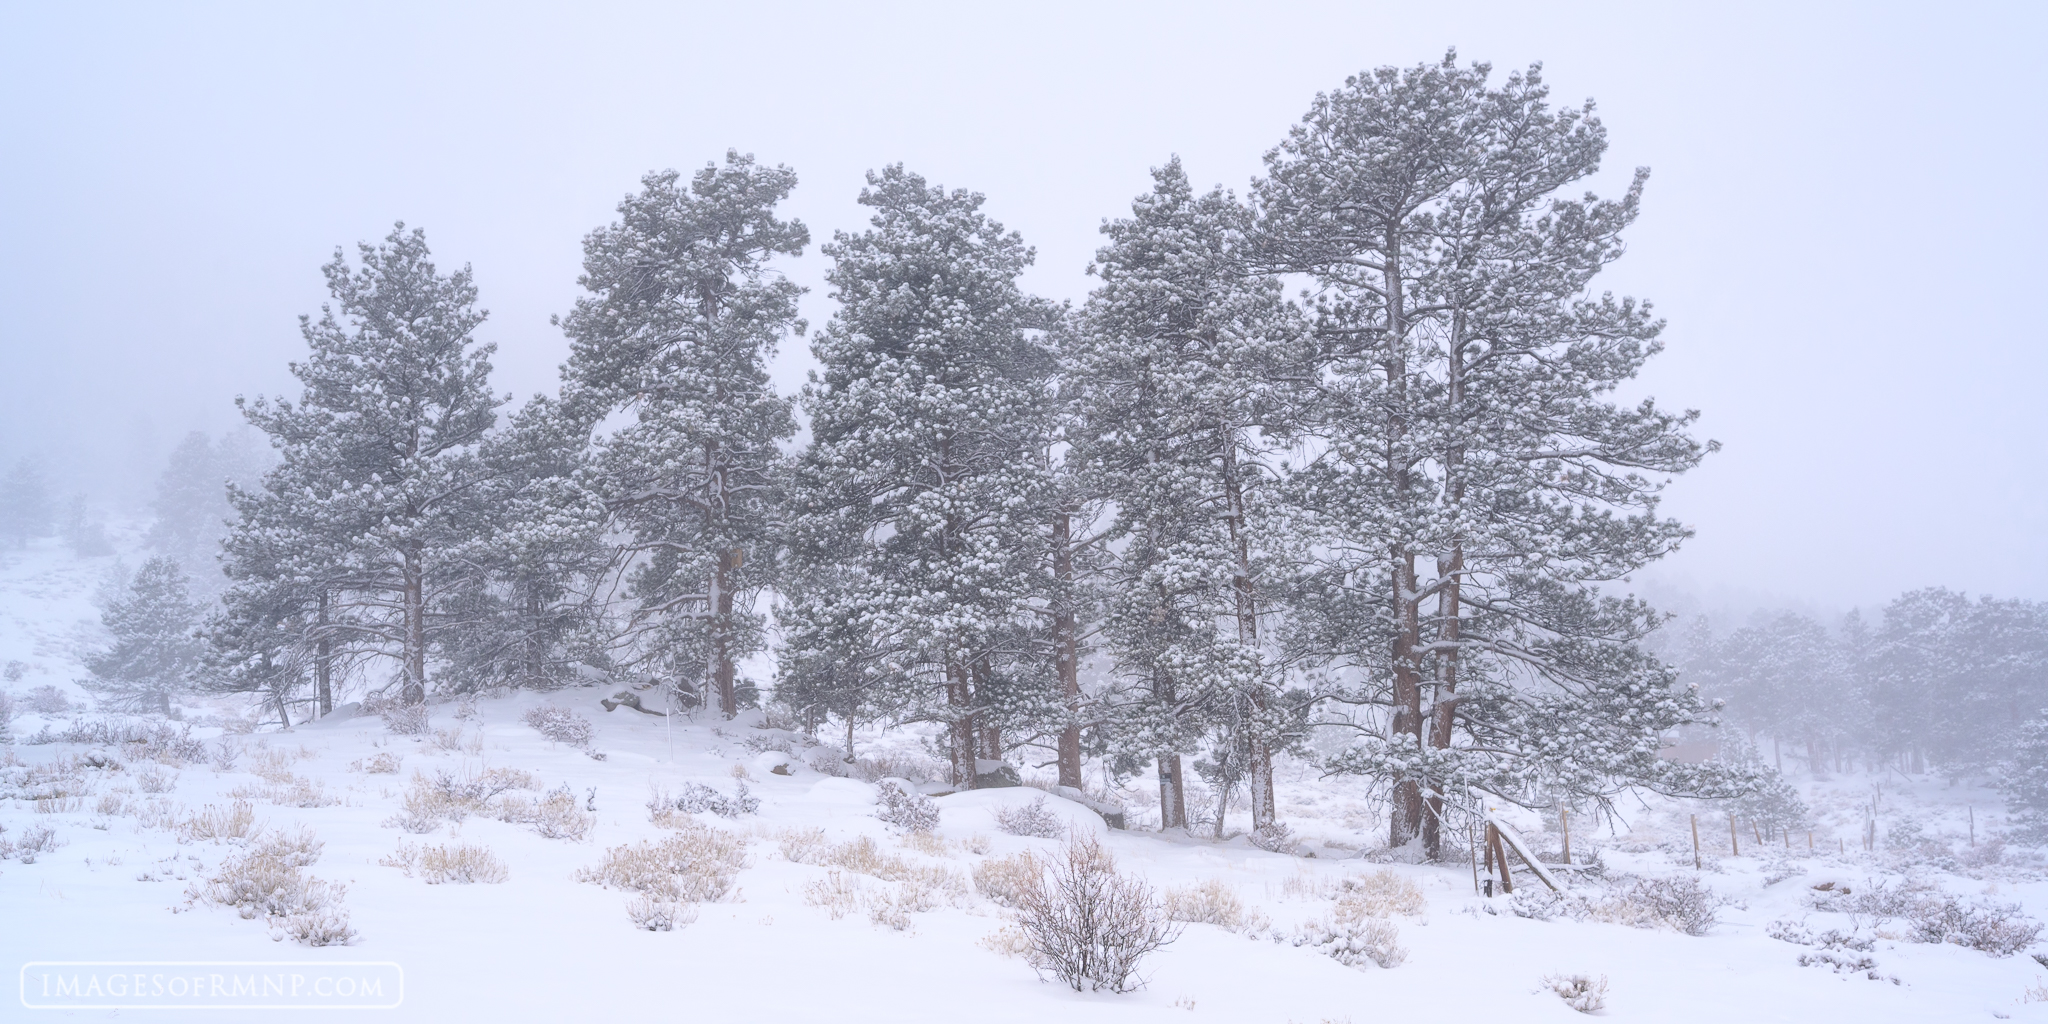 An evening snowstorm moved in quickly and turned the ponderosa forest into a beautiful painting.